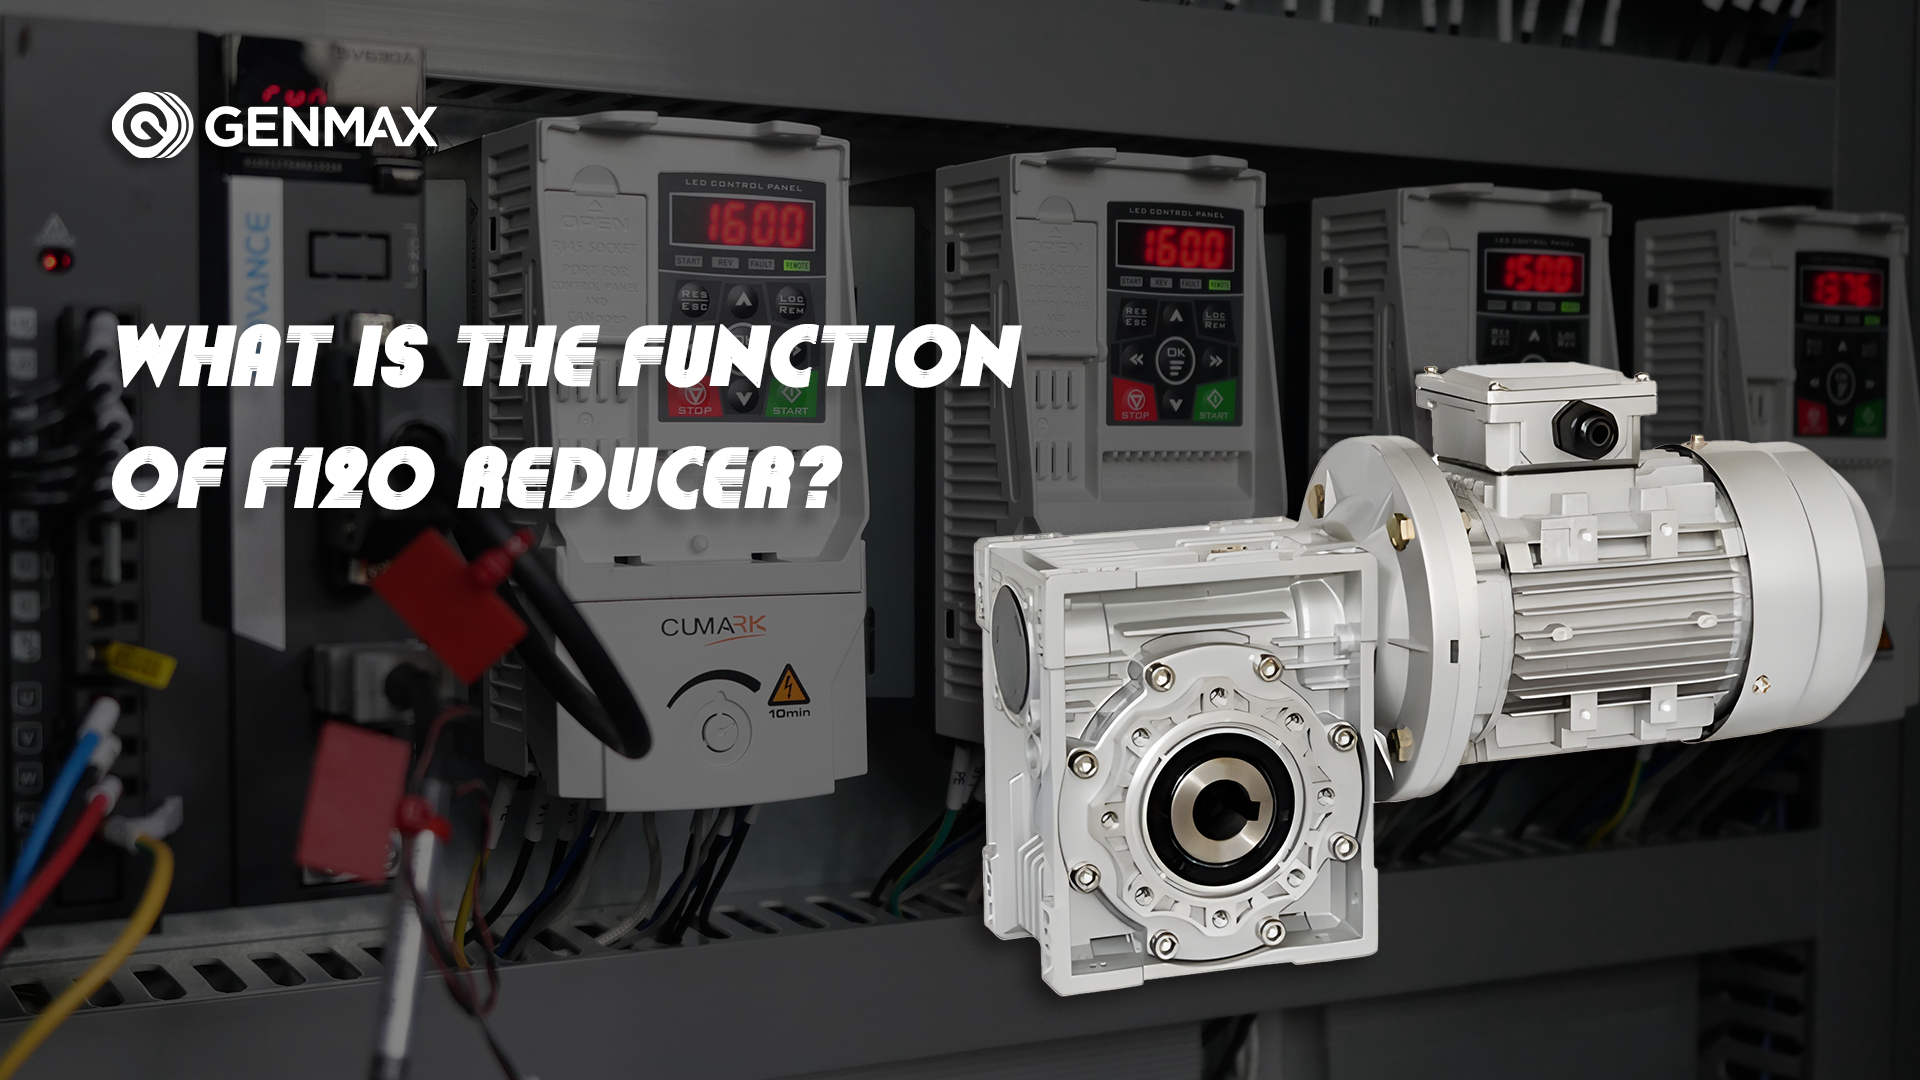 What Is The Function of F120 Reducer?